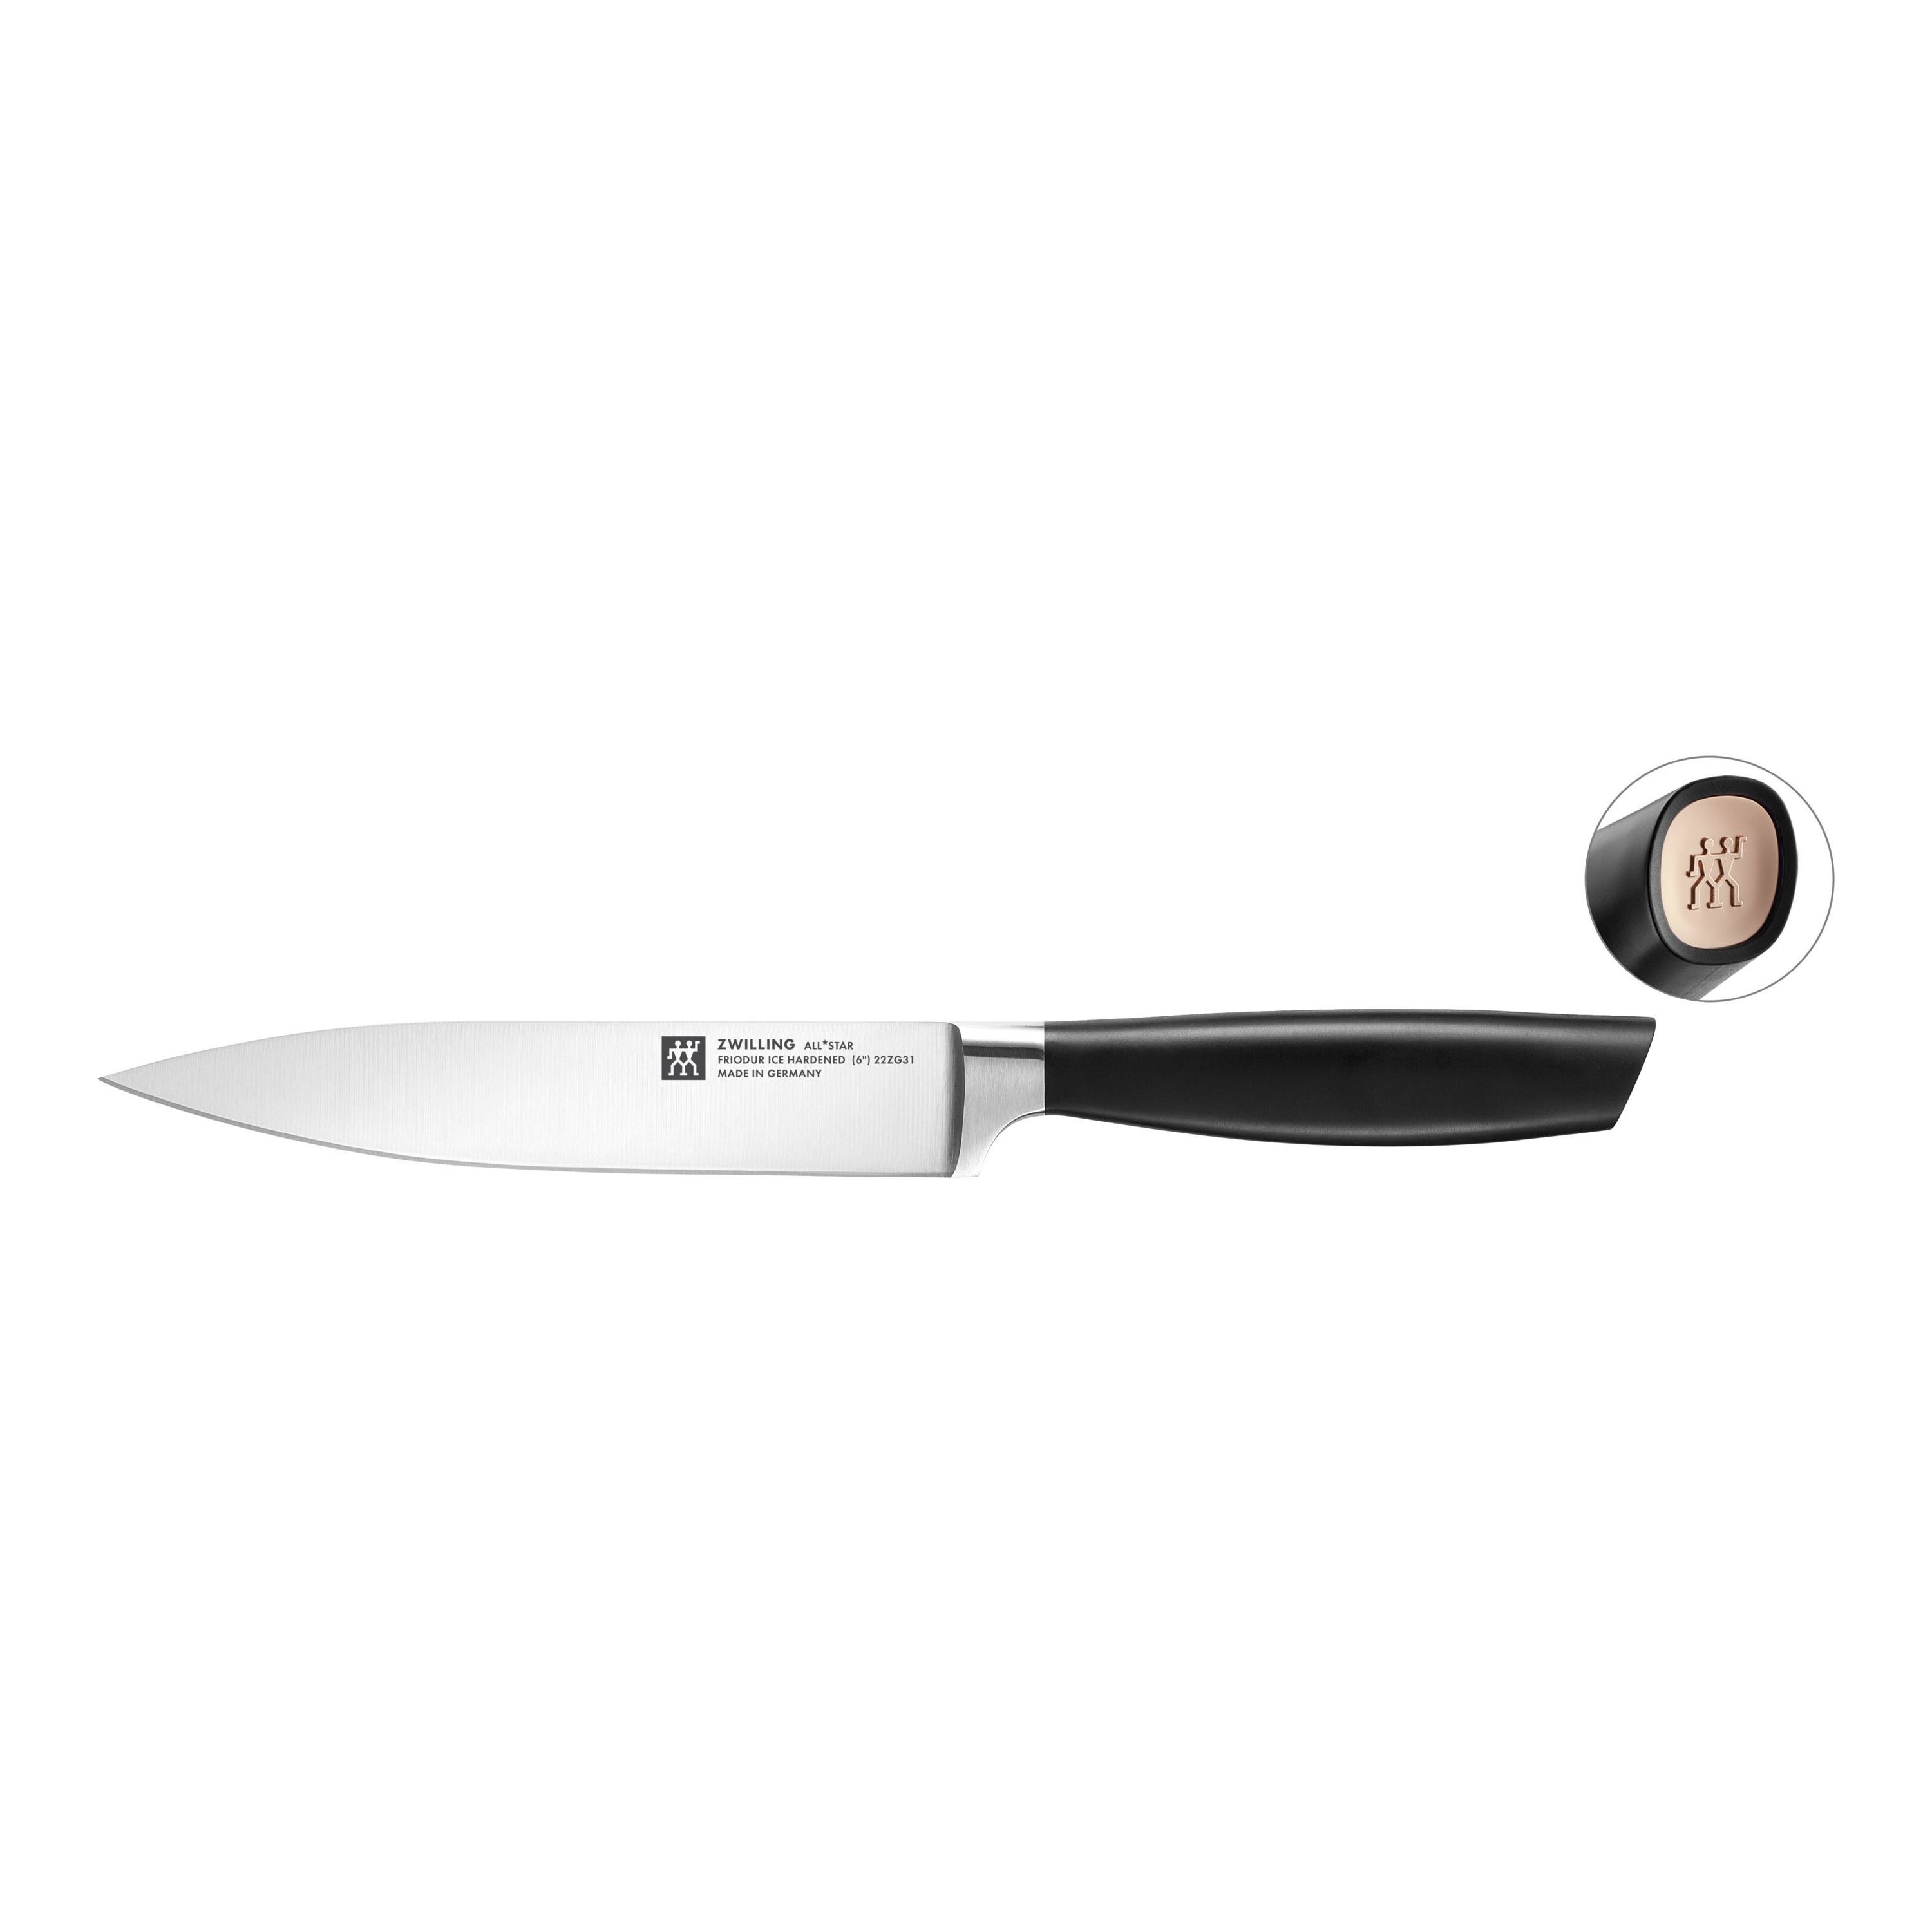 ZWILLING All * Star Couteau à trancher 16 cm, or rose